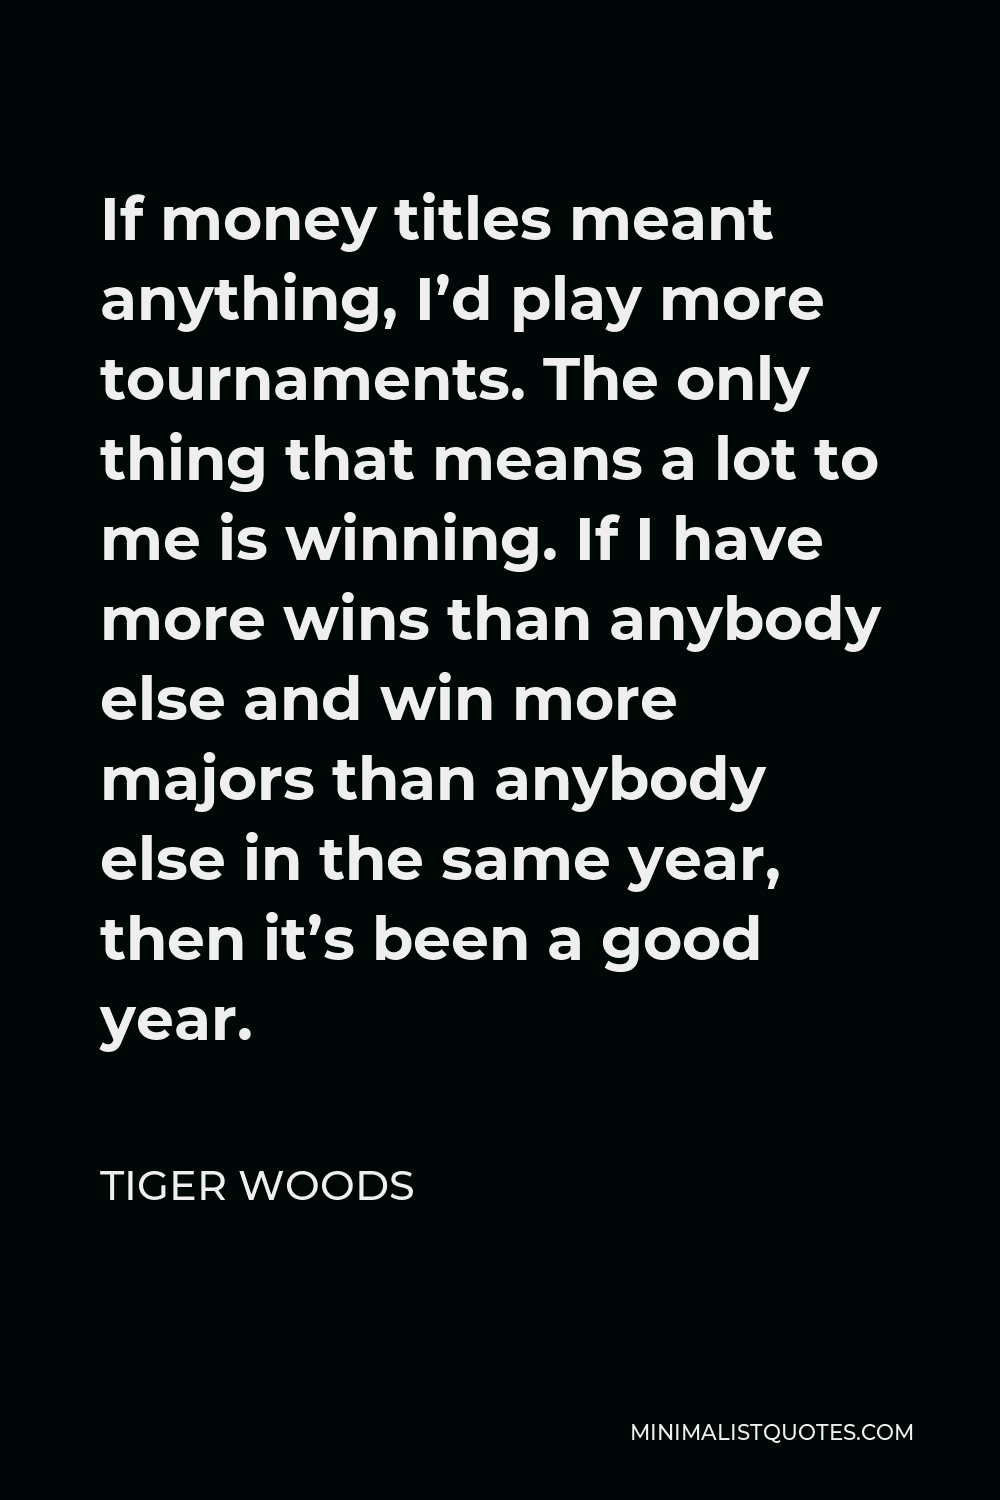 Tiger Woods Quote - If money titles meant anything, I’d play more tournaments. The only thing that means a lot to me is winning. If I have more wins than anybody else and win more majors than anybody else in the same year, then it’s been a good year.